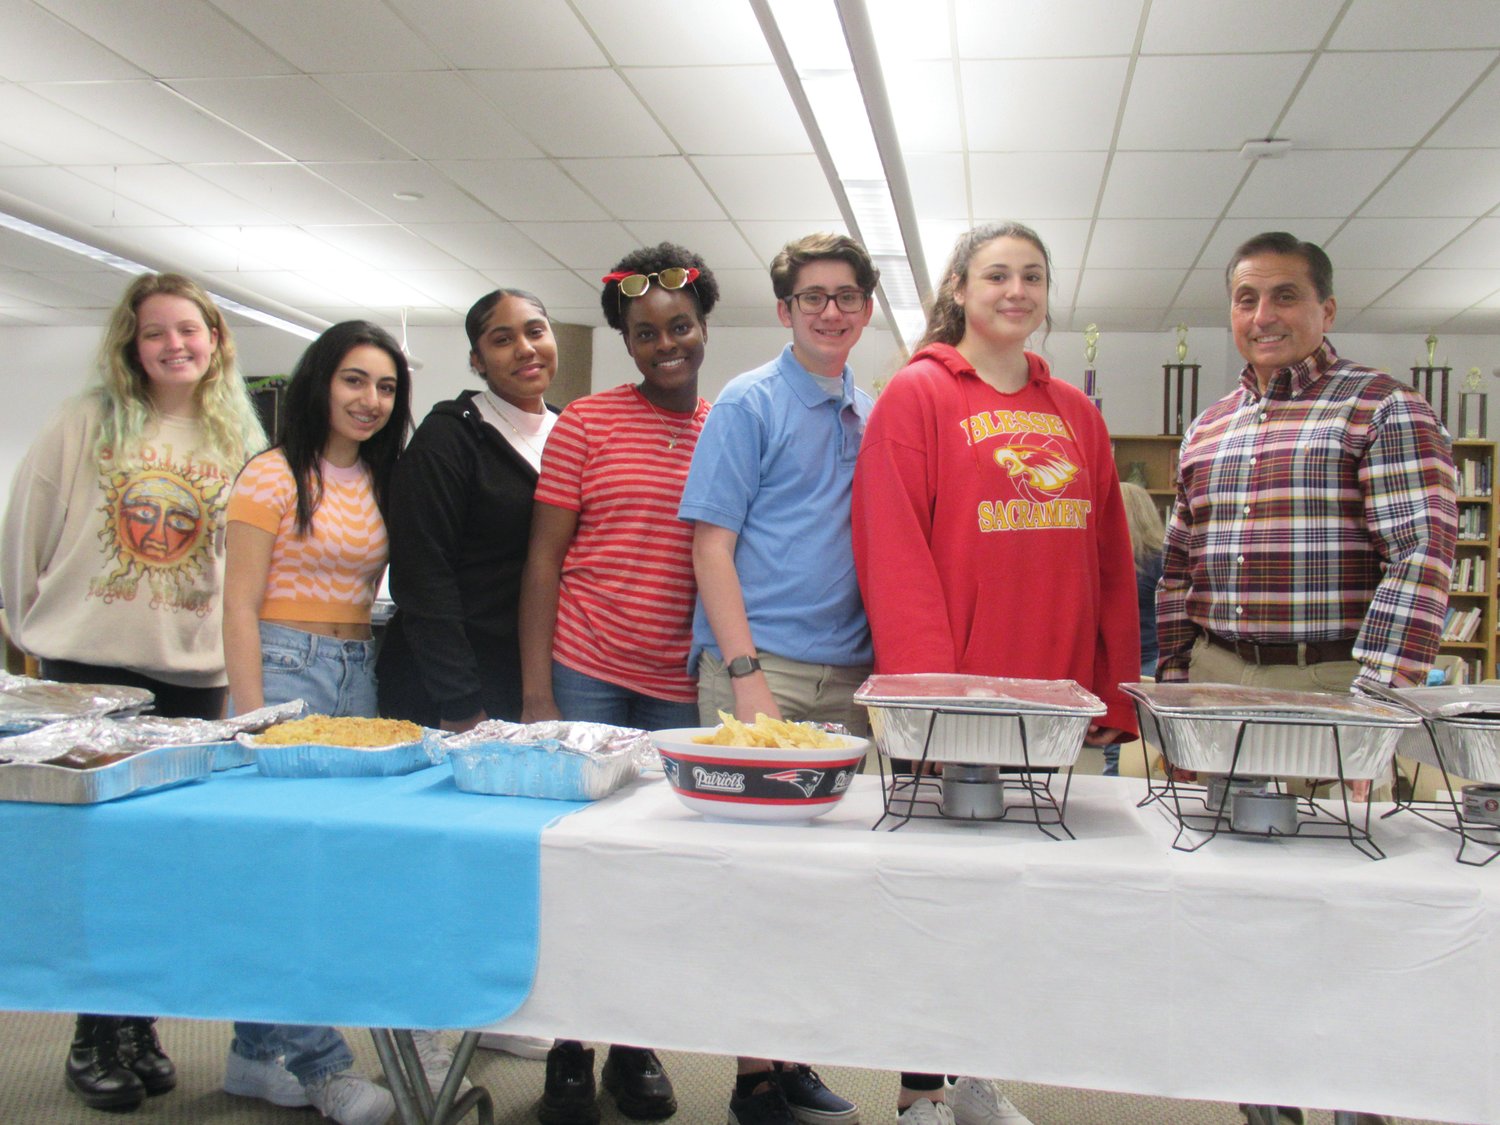 PROUD PANTHERS: Among those Student Council members who helped make JHS’ Teacher Appreciation Week super special are, from left; Trinity Blondin, Alessandra Pesare, Raylin Santos, Josephine Olagundoye, Charles Curci, Tala Laflamme and Advisor/Organizer Greg Russo.